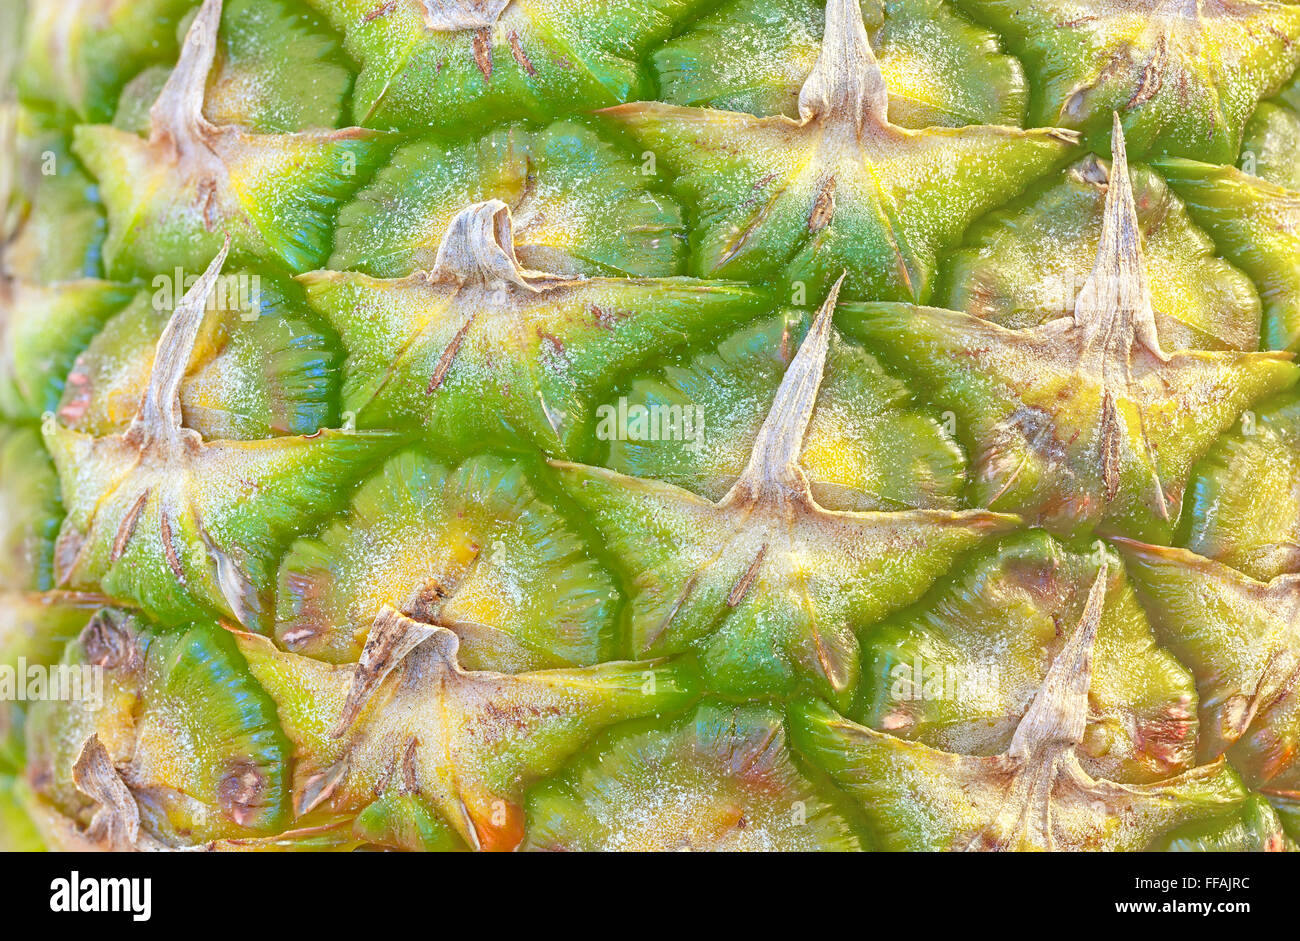 Close up picture of a fresh pineapple skin. Stock Photo